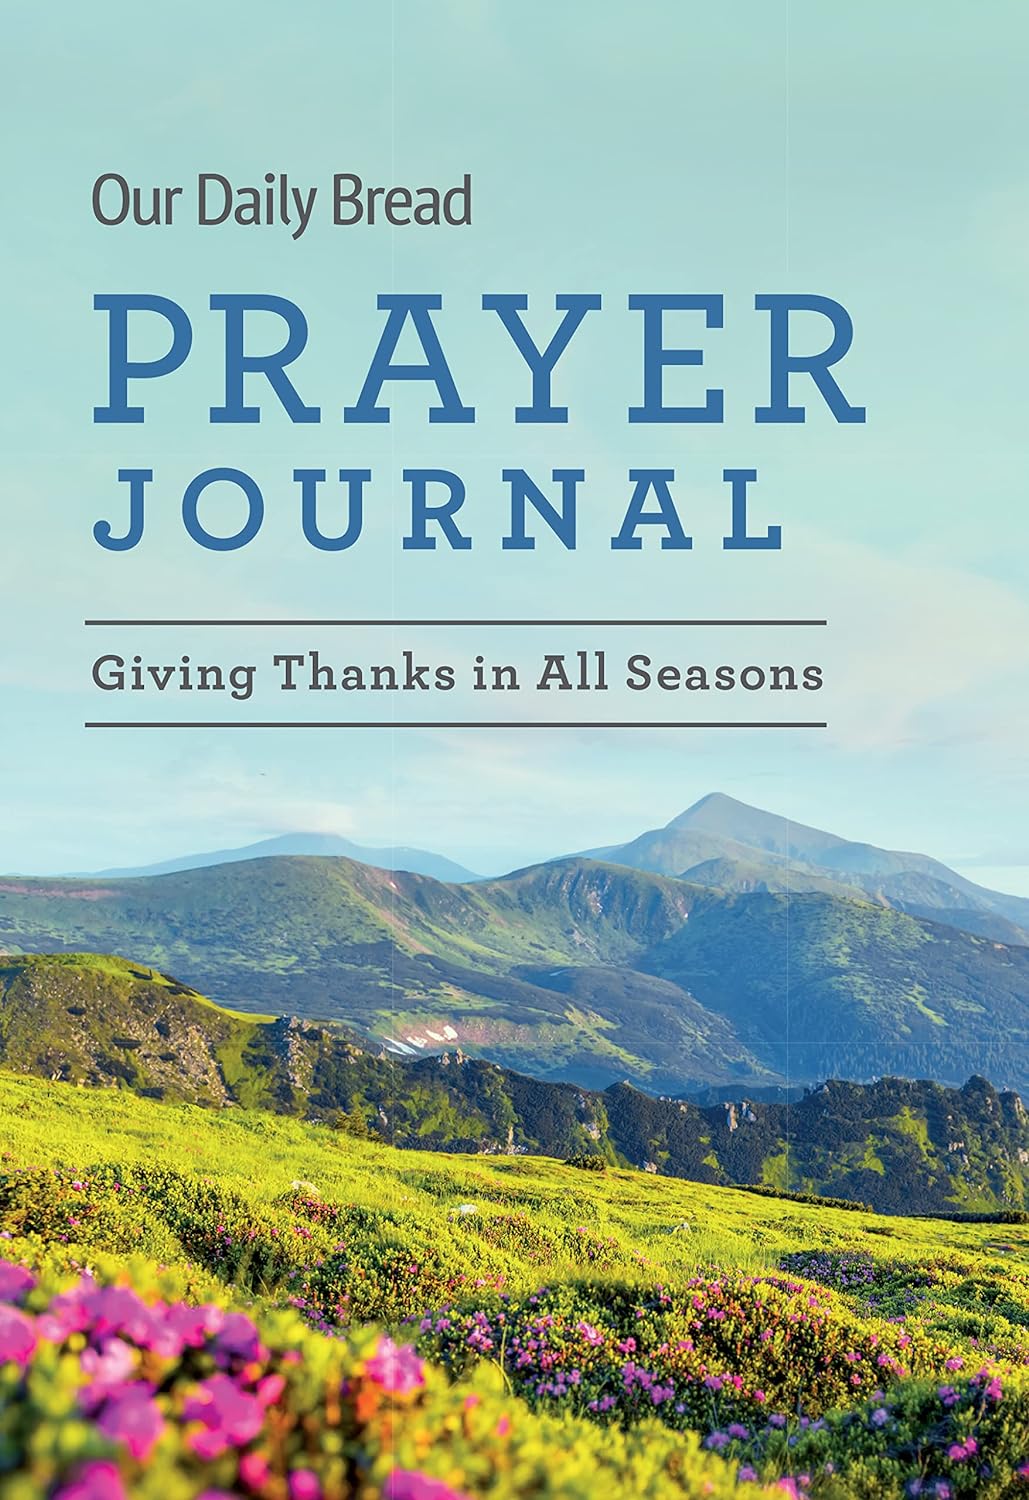 Our Daily Bread Prayer Journal - Giving Thanks in All Seasons